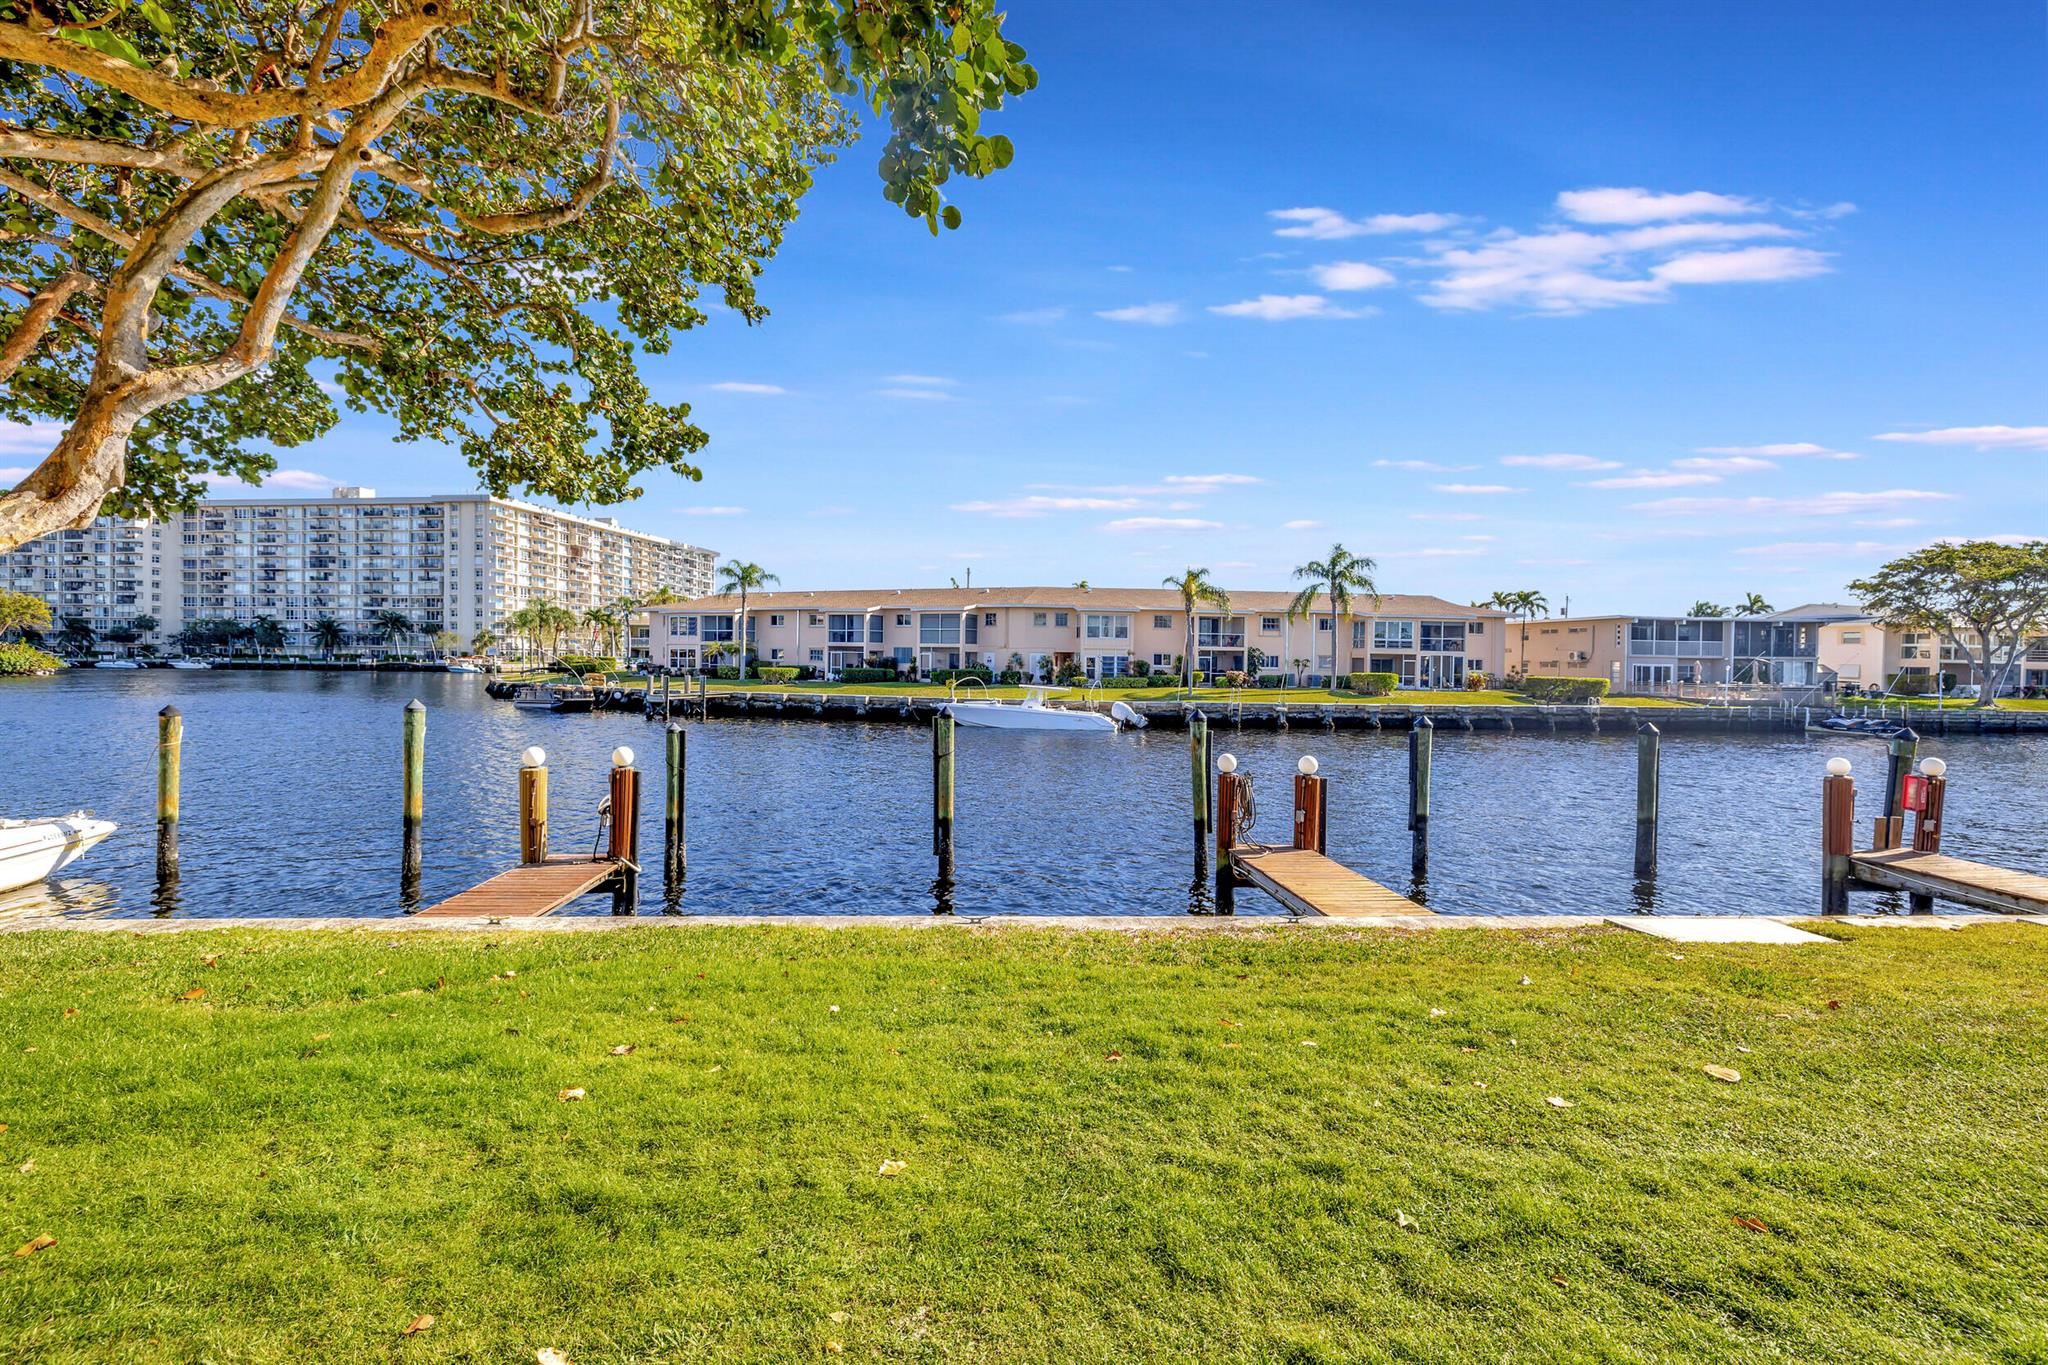 Welcome home to Noble Point, an unparalleled boaters dream of a small gated waterfront community.  Your assigned boat dock with water, electric and lighting is directly behind this ground floor Deluxe Model (only 11 of these large units in the complex). The Premium Southern Exposure and Extensive backyard lawn all overlooking the wide water basin views add to the charm of this rarely available condo. Besides the private dock you have covered parking for your land toy as well! A true hidden gem of a complex has a heated/cooled pool, clubhouse, hot tub, tennis/pickle ball courts and a great tiki hut BBQ area. Outside there is a Large screened patio for ultimate SoFlo living, inside features hard wood floors and neutral colors making this one a must see!  Private Dockage for your large Boat!